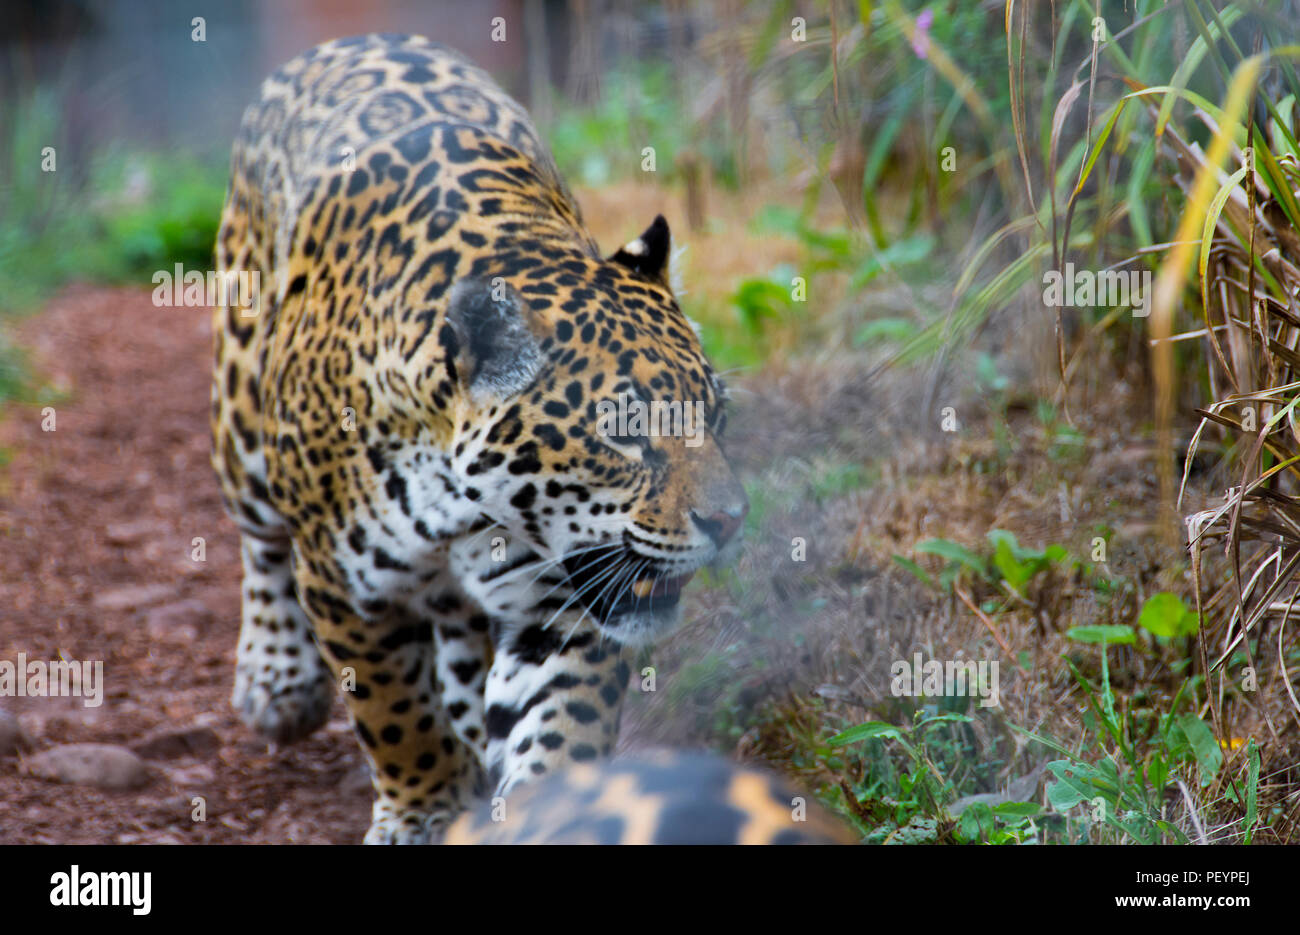 The jaguar is a wild cat species. Native to the Americas. From Southwestern United States, Mexico,Central America and south to Paraguay and Argentina. Stock Photo